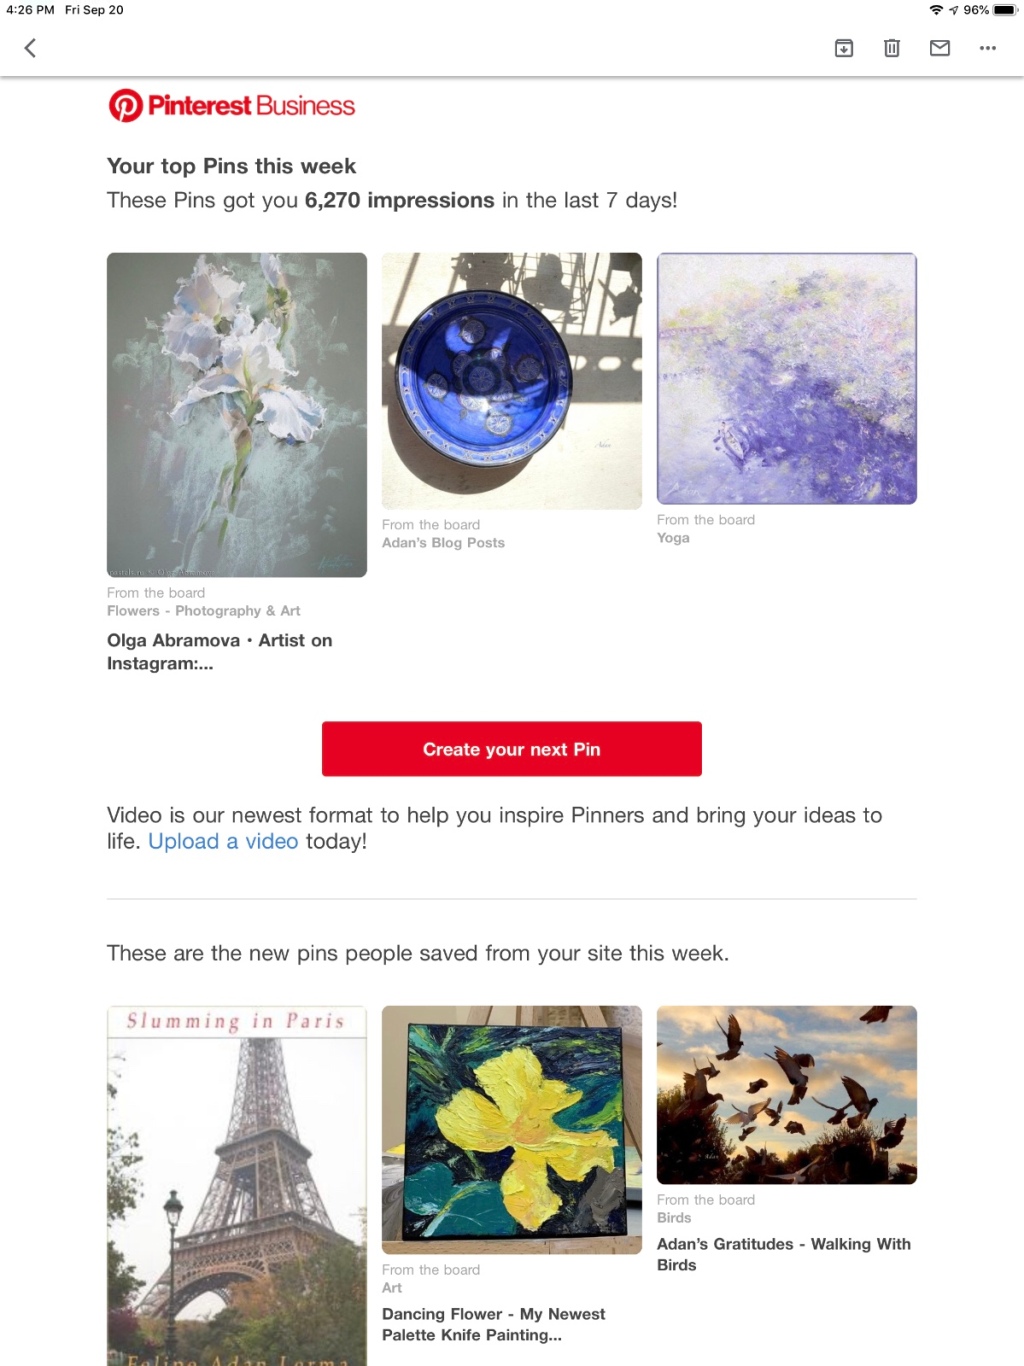 My Top Pins On Pinterest 2nd Week of September 2019 – Yoga & Impressionism! 😊